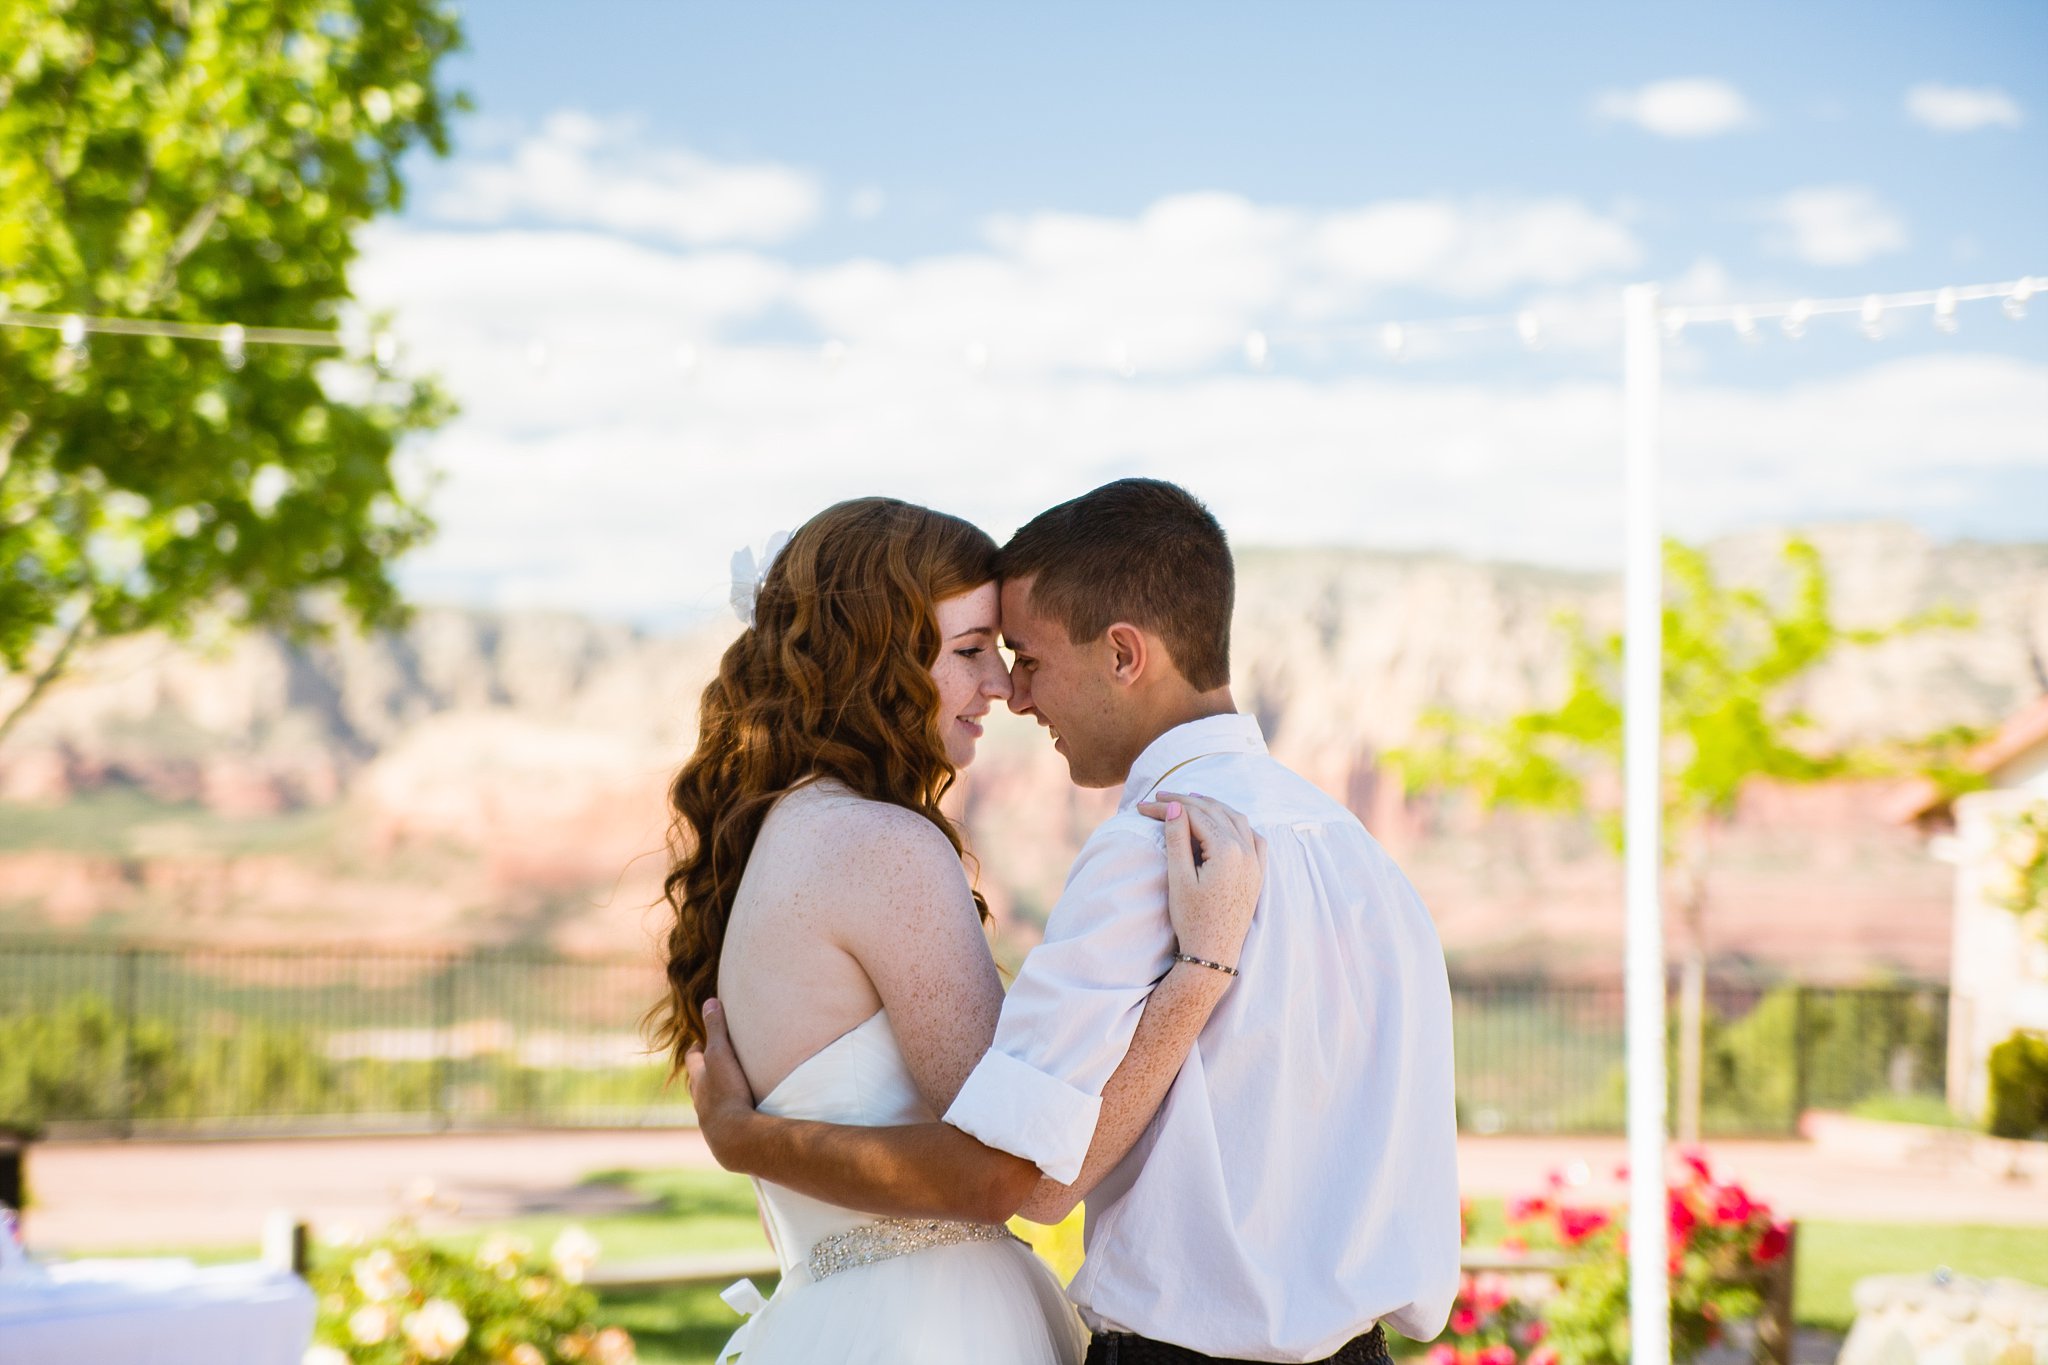 Bride and groom sharing first dance at their Sky Ranch Lodge wedding reception by Arizona wedding photographer PMA Photography.